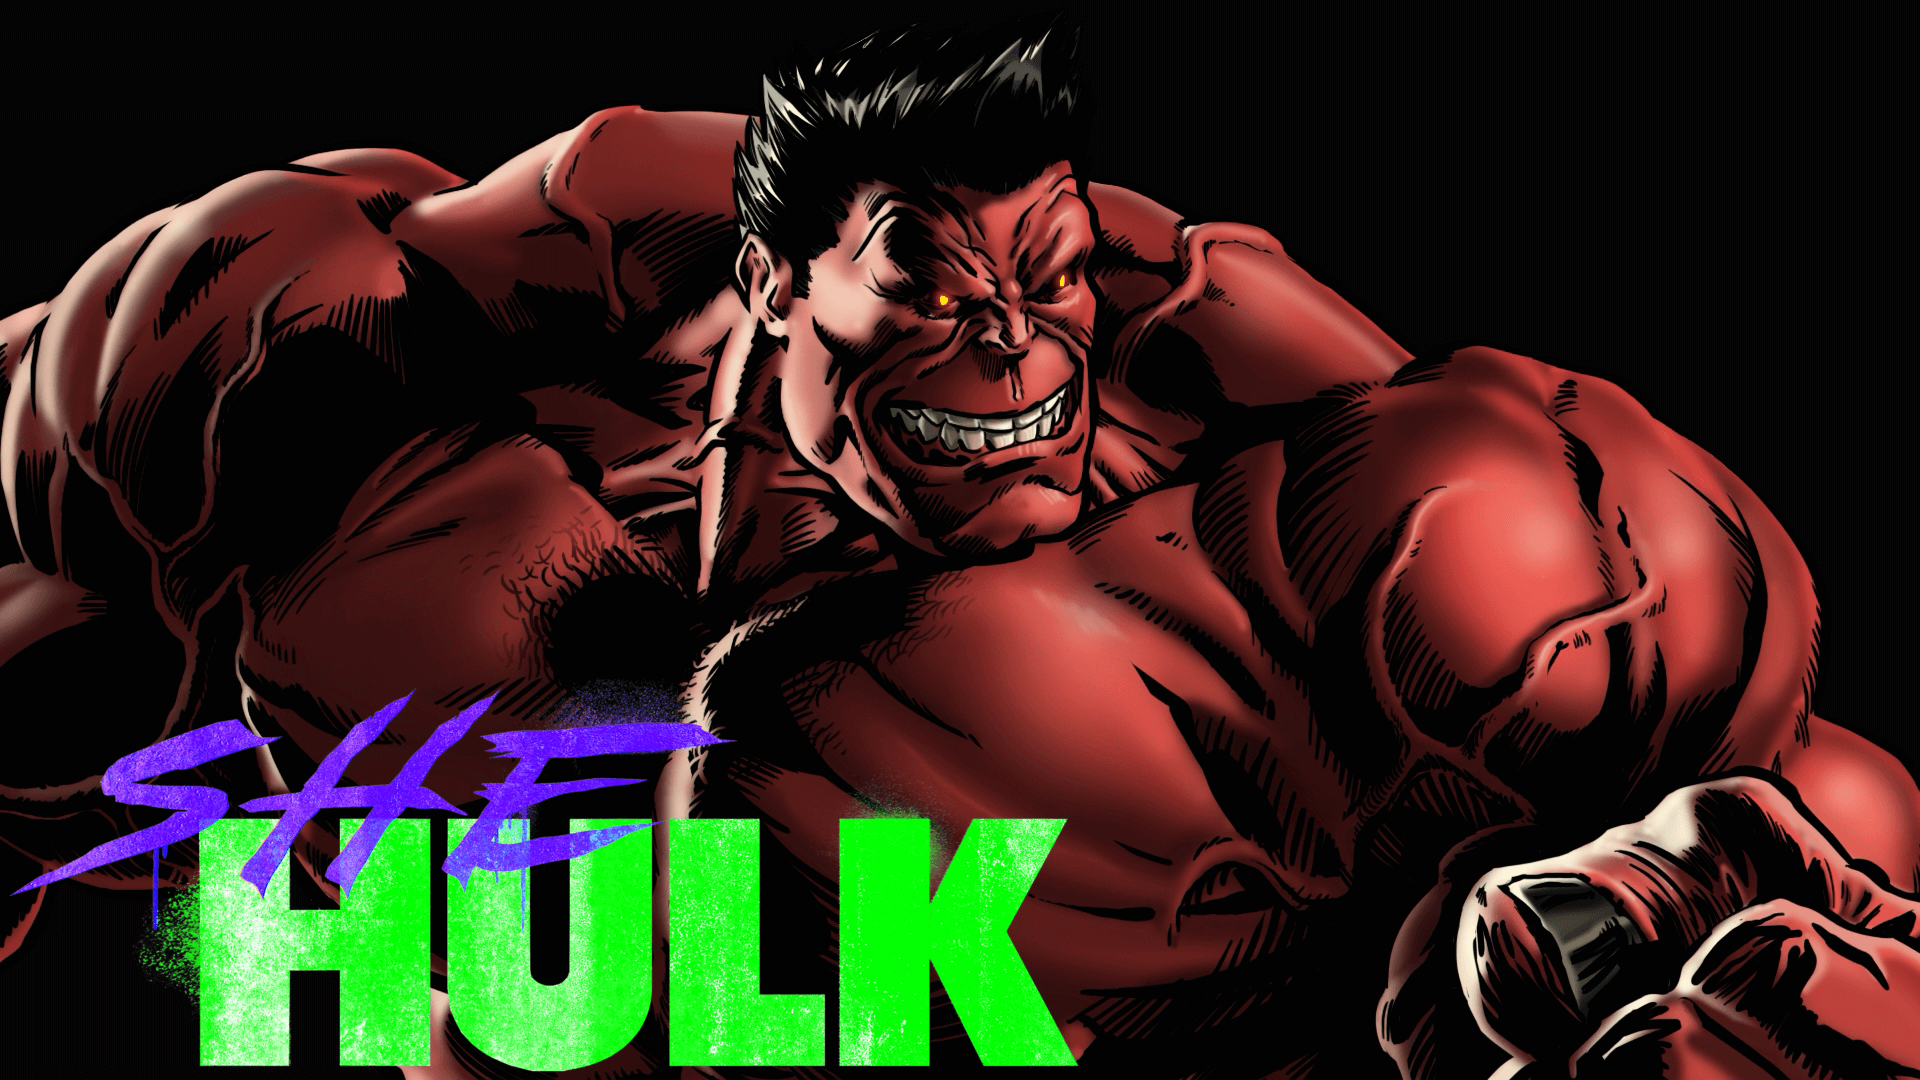 Red Hulk To Reportedly Debut In Marvel’s Disney+ Series ‘She-Hulk’